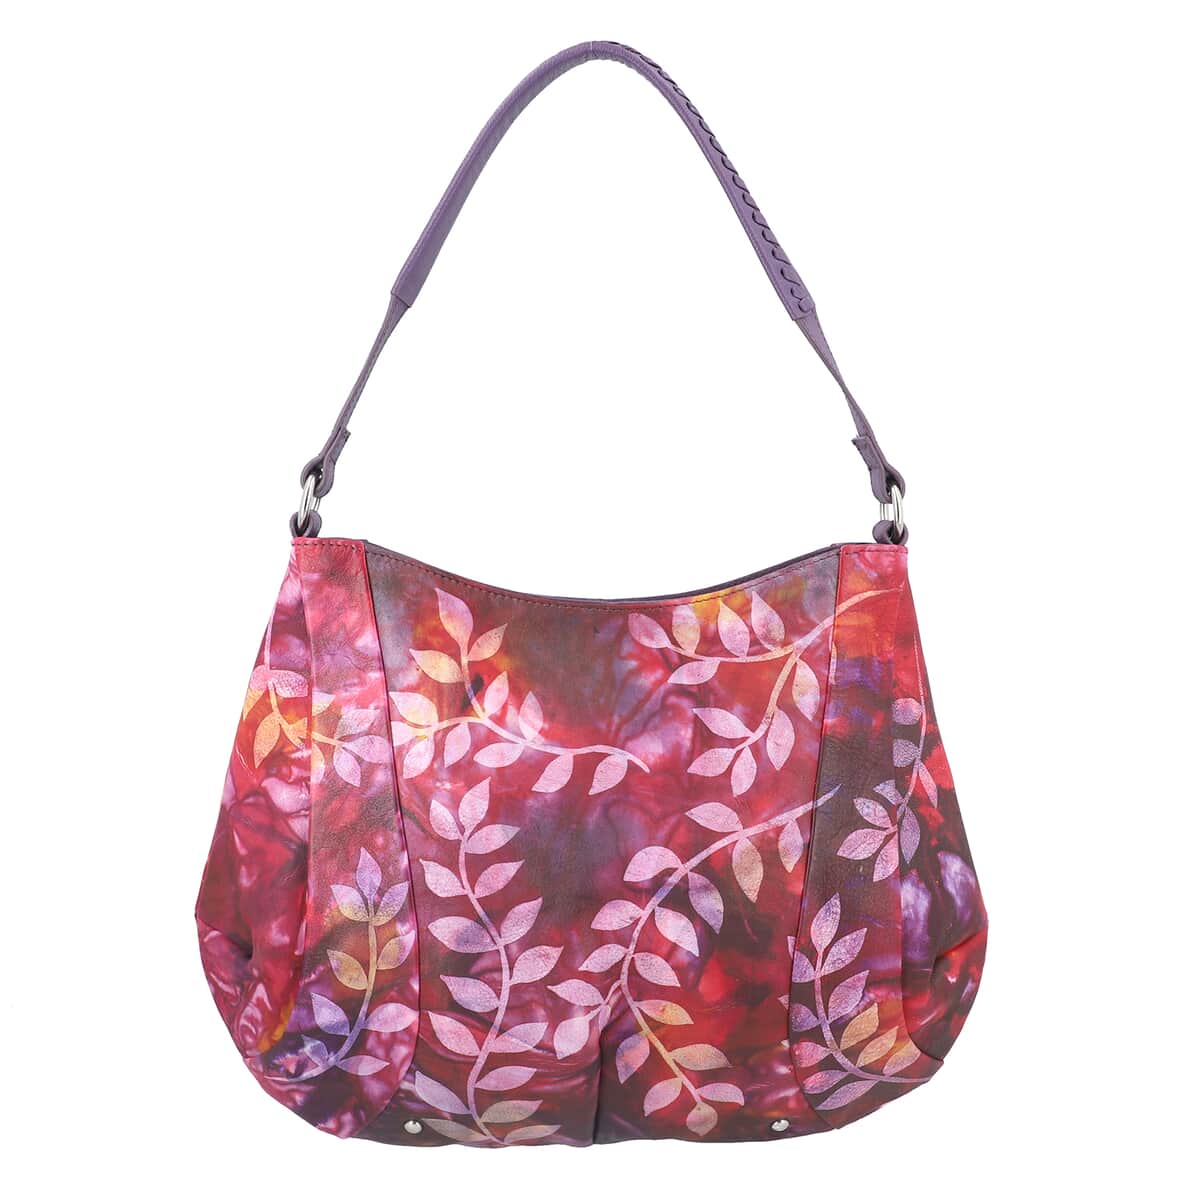 "SUKRITI 100% Genuine Leather Hobo Bag Theme: Tie Dye Color: Purple Size: 14.56 x 7.6 x 9 inches" image number 0